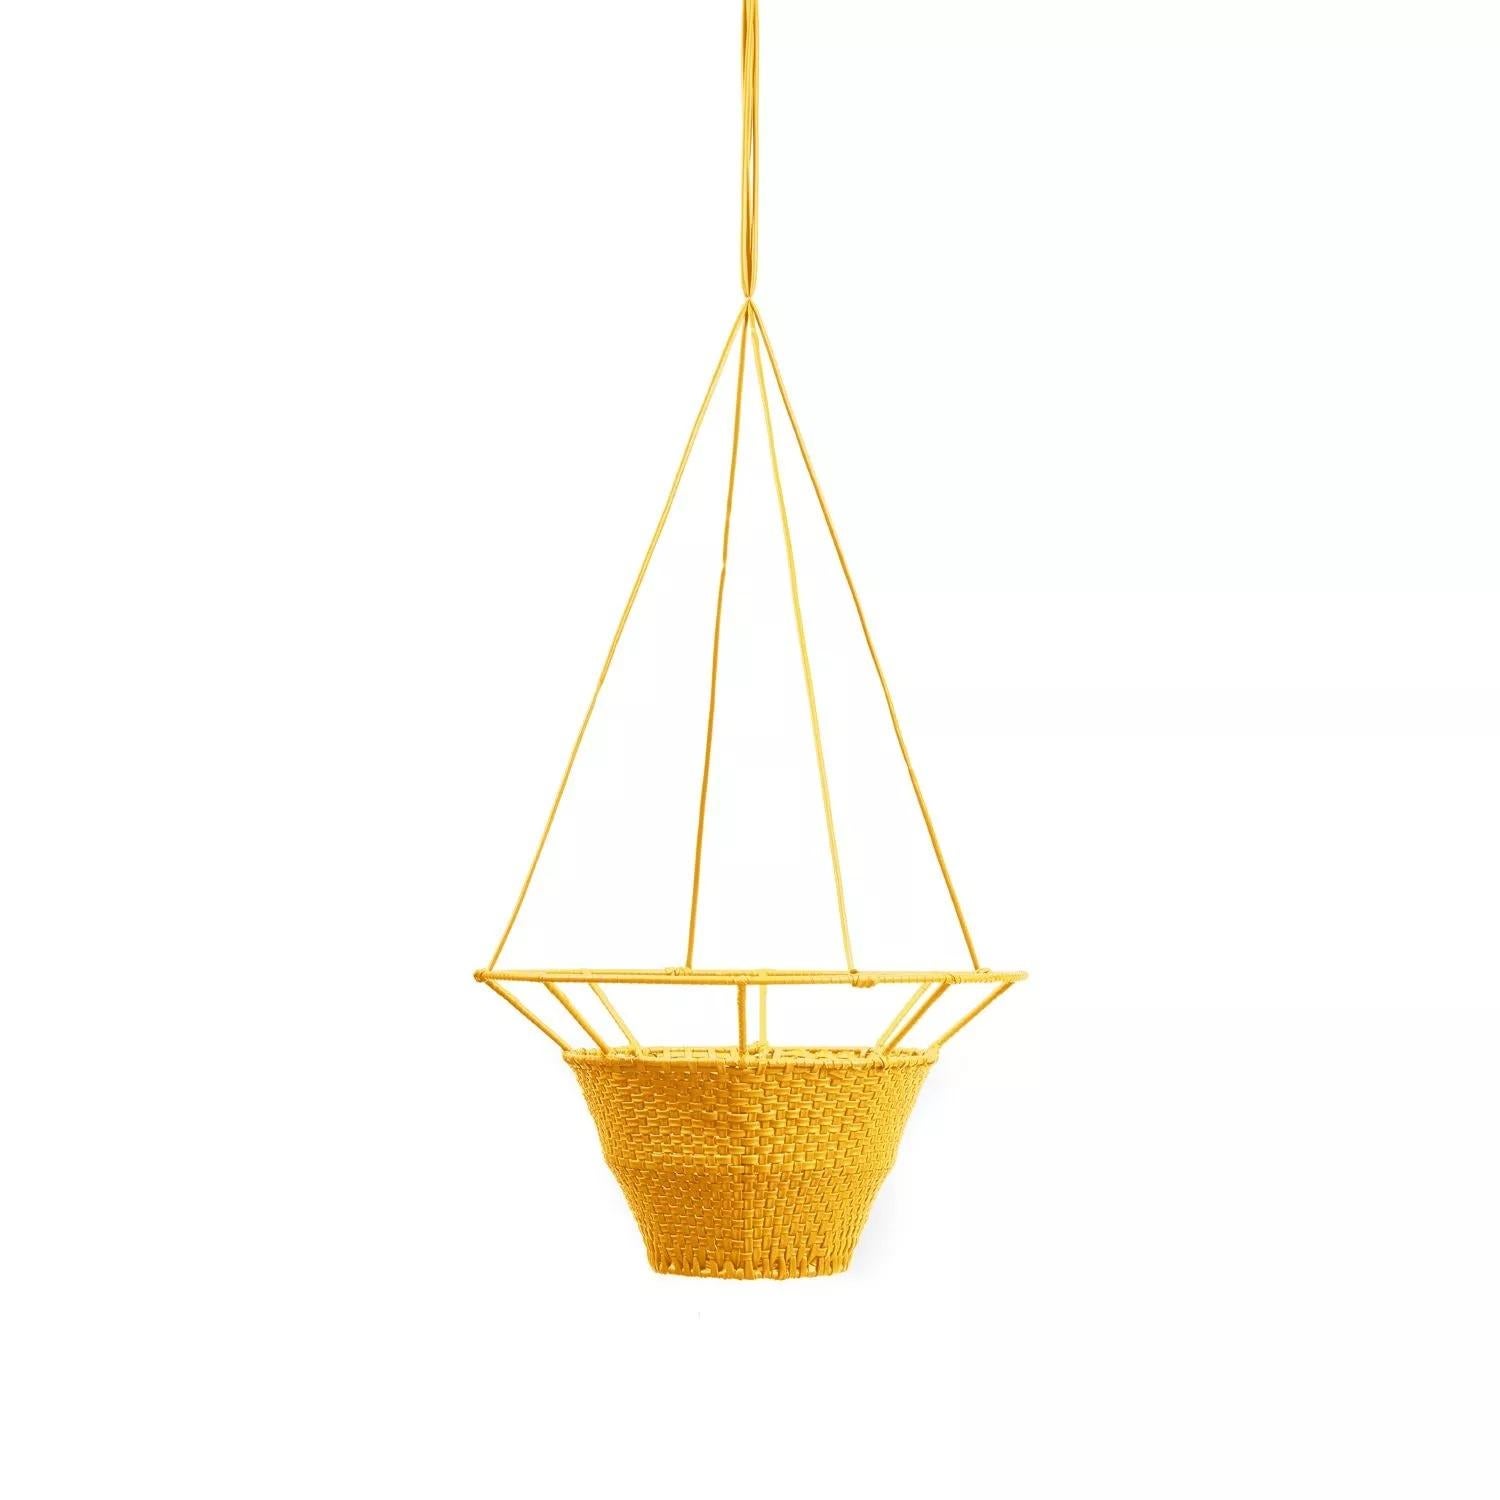 Small dichas hanging planter by Cristina Celestino. 
Materials: PVC strings made from recycled plastic
Dimensions: D 40 x H 17 cm 
Available in colors: black red, honey yellow, olive green. Available in other size.

The Dichas Hanging Planters